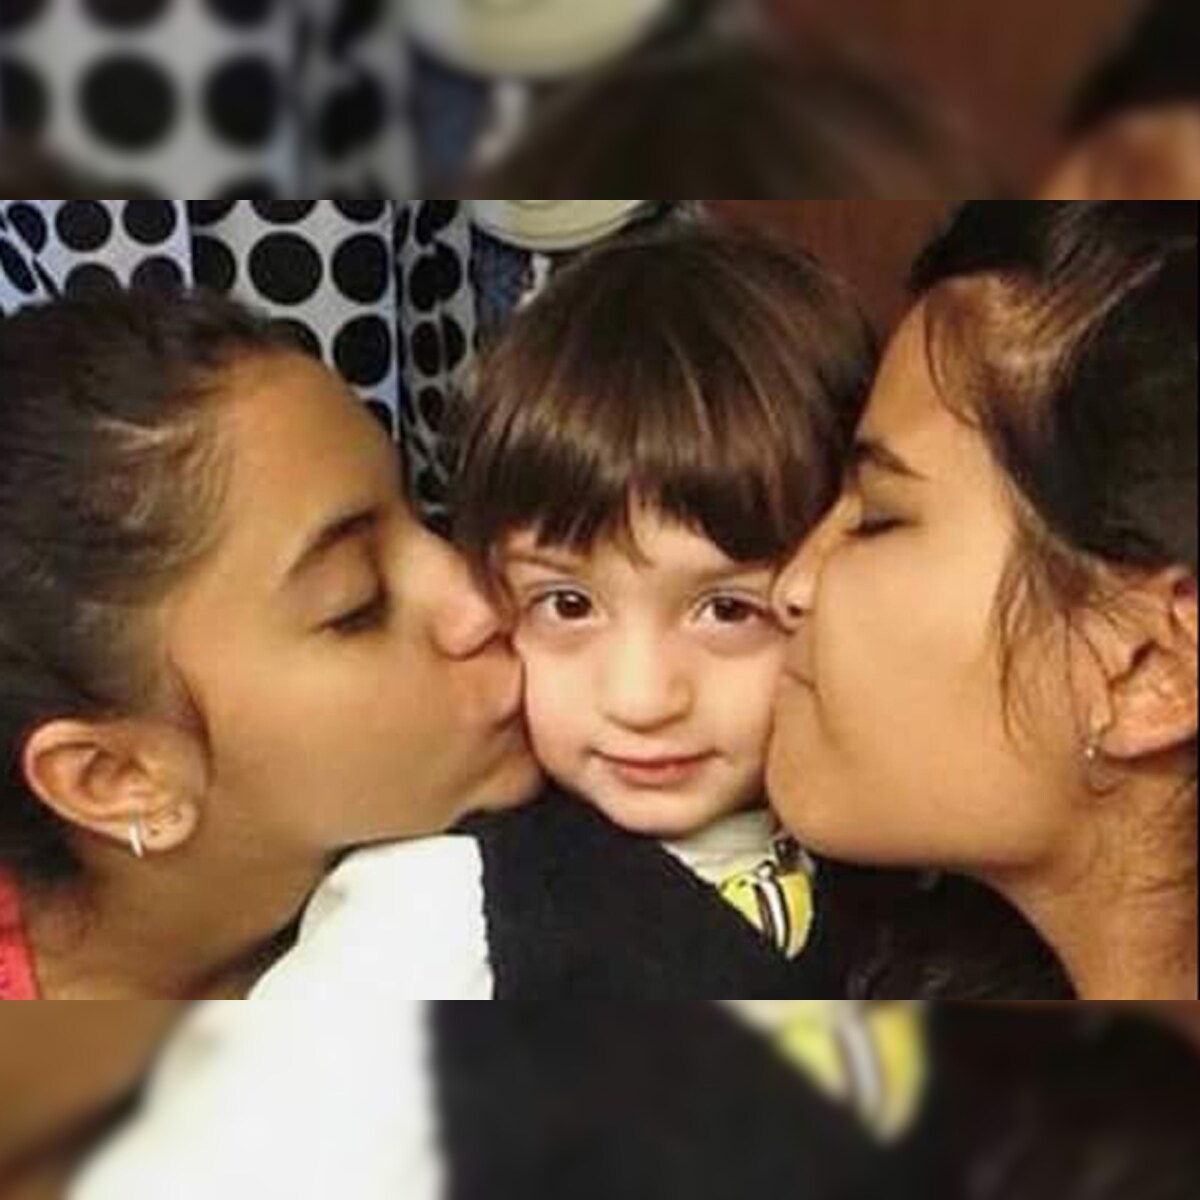 Shah Rukh Khan's son AbRam's latest picture is all kinds of awesome